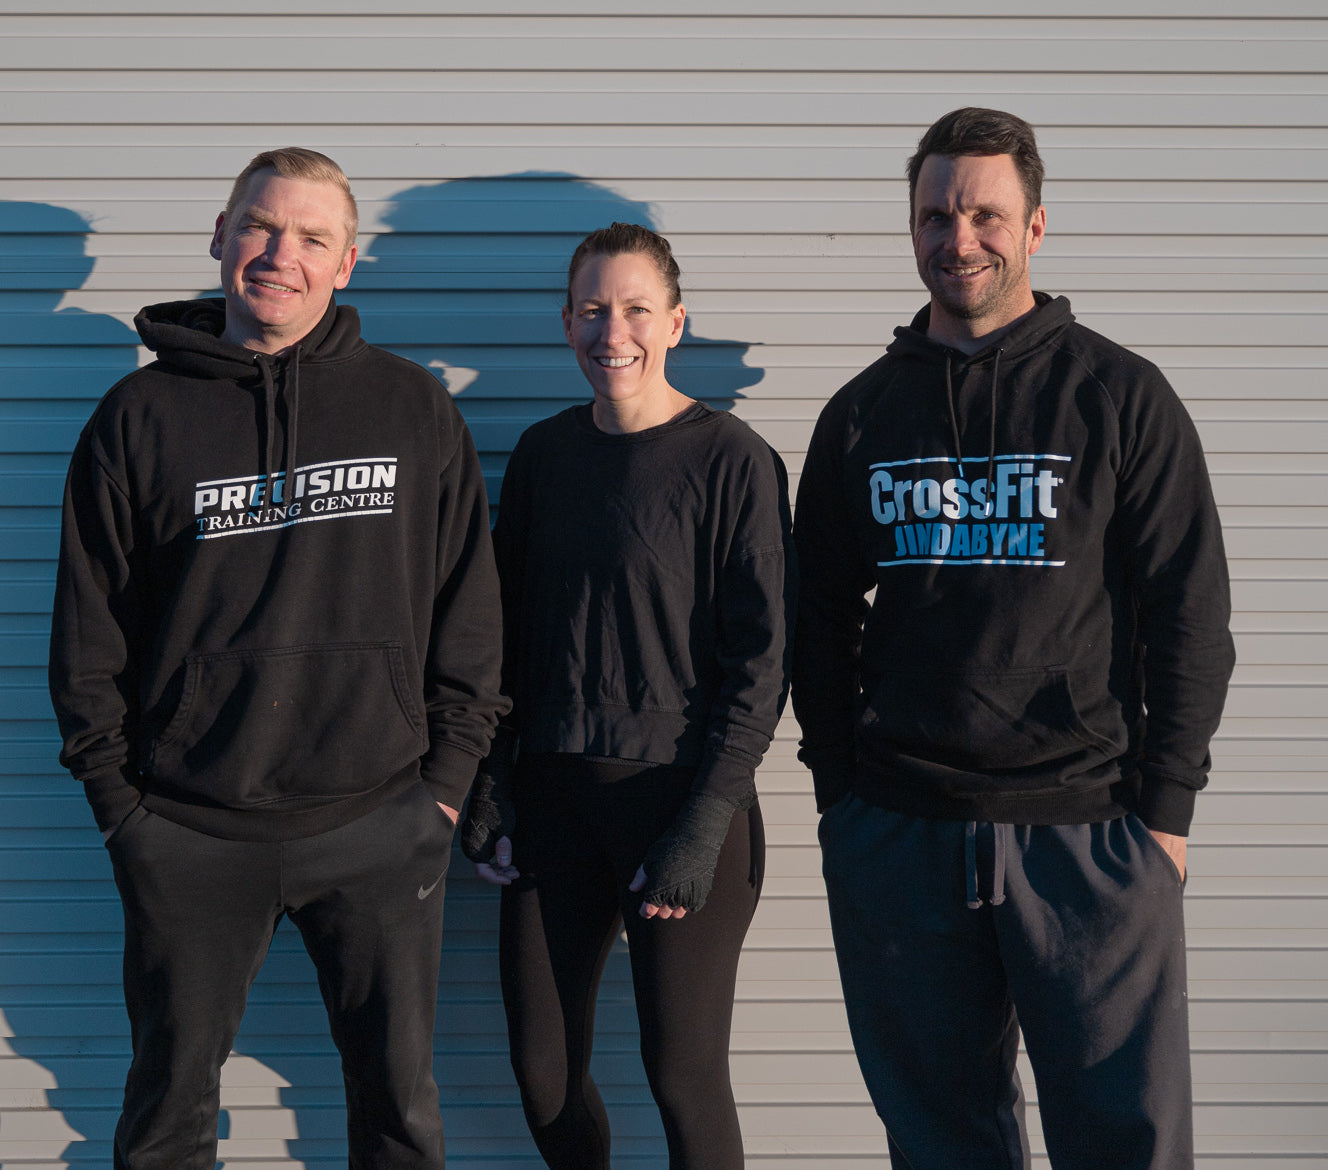 Jindabyne Crossfit Coaches outside of Precision Training Centre